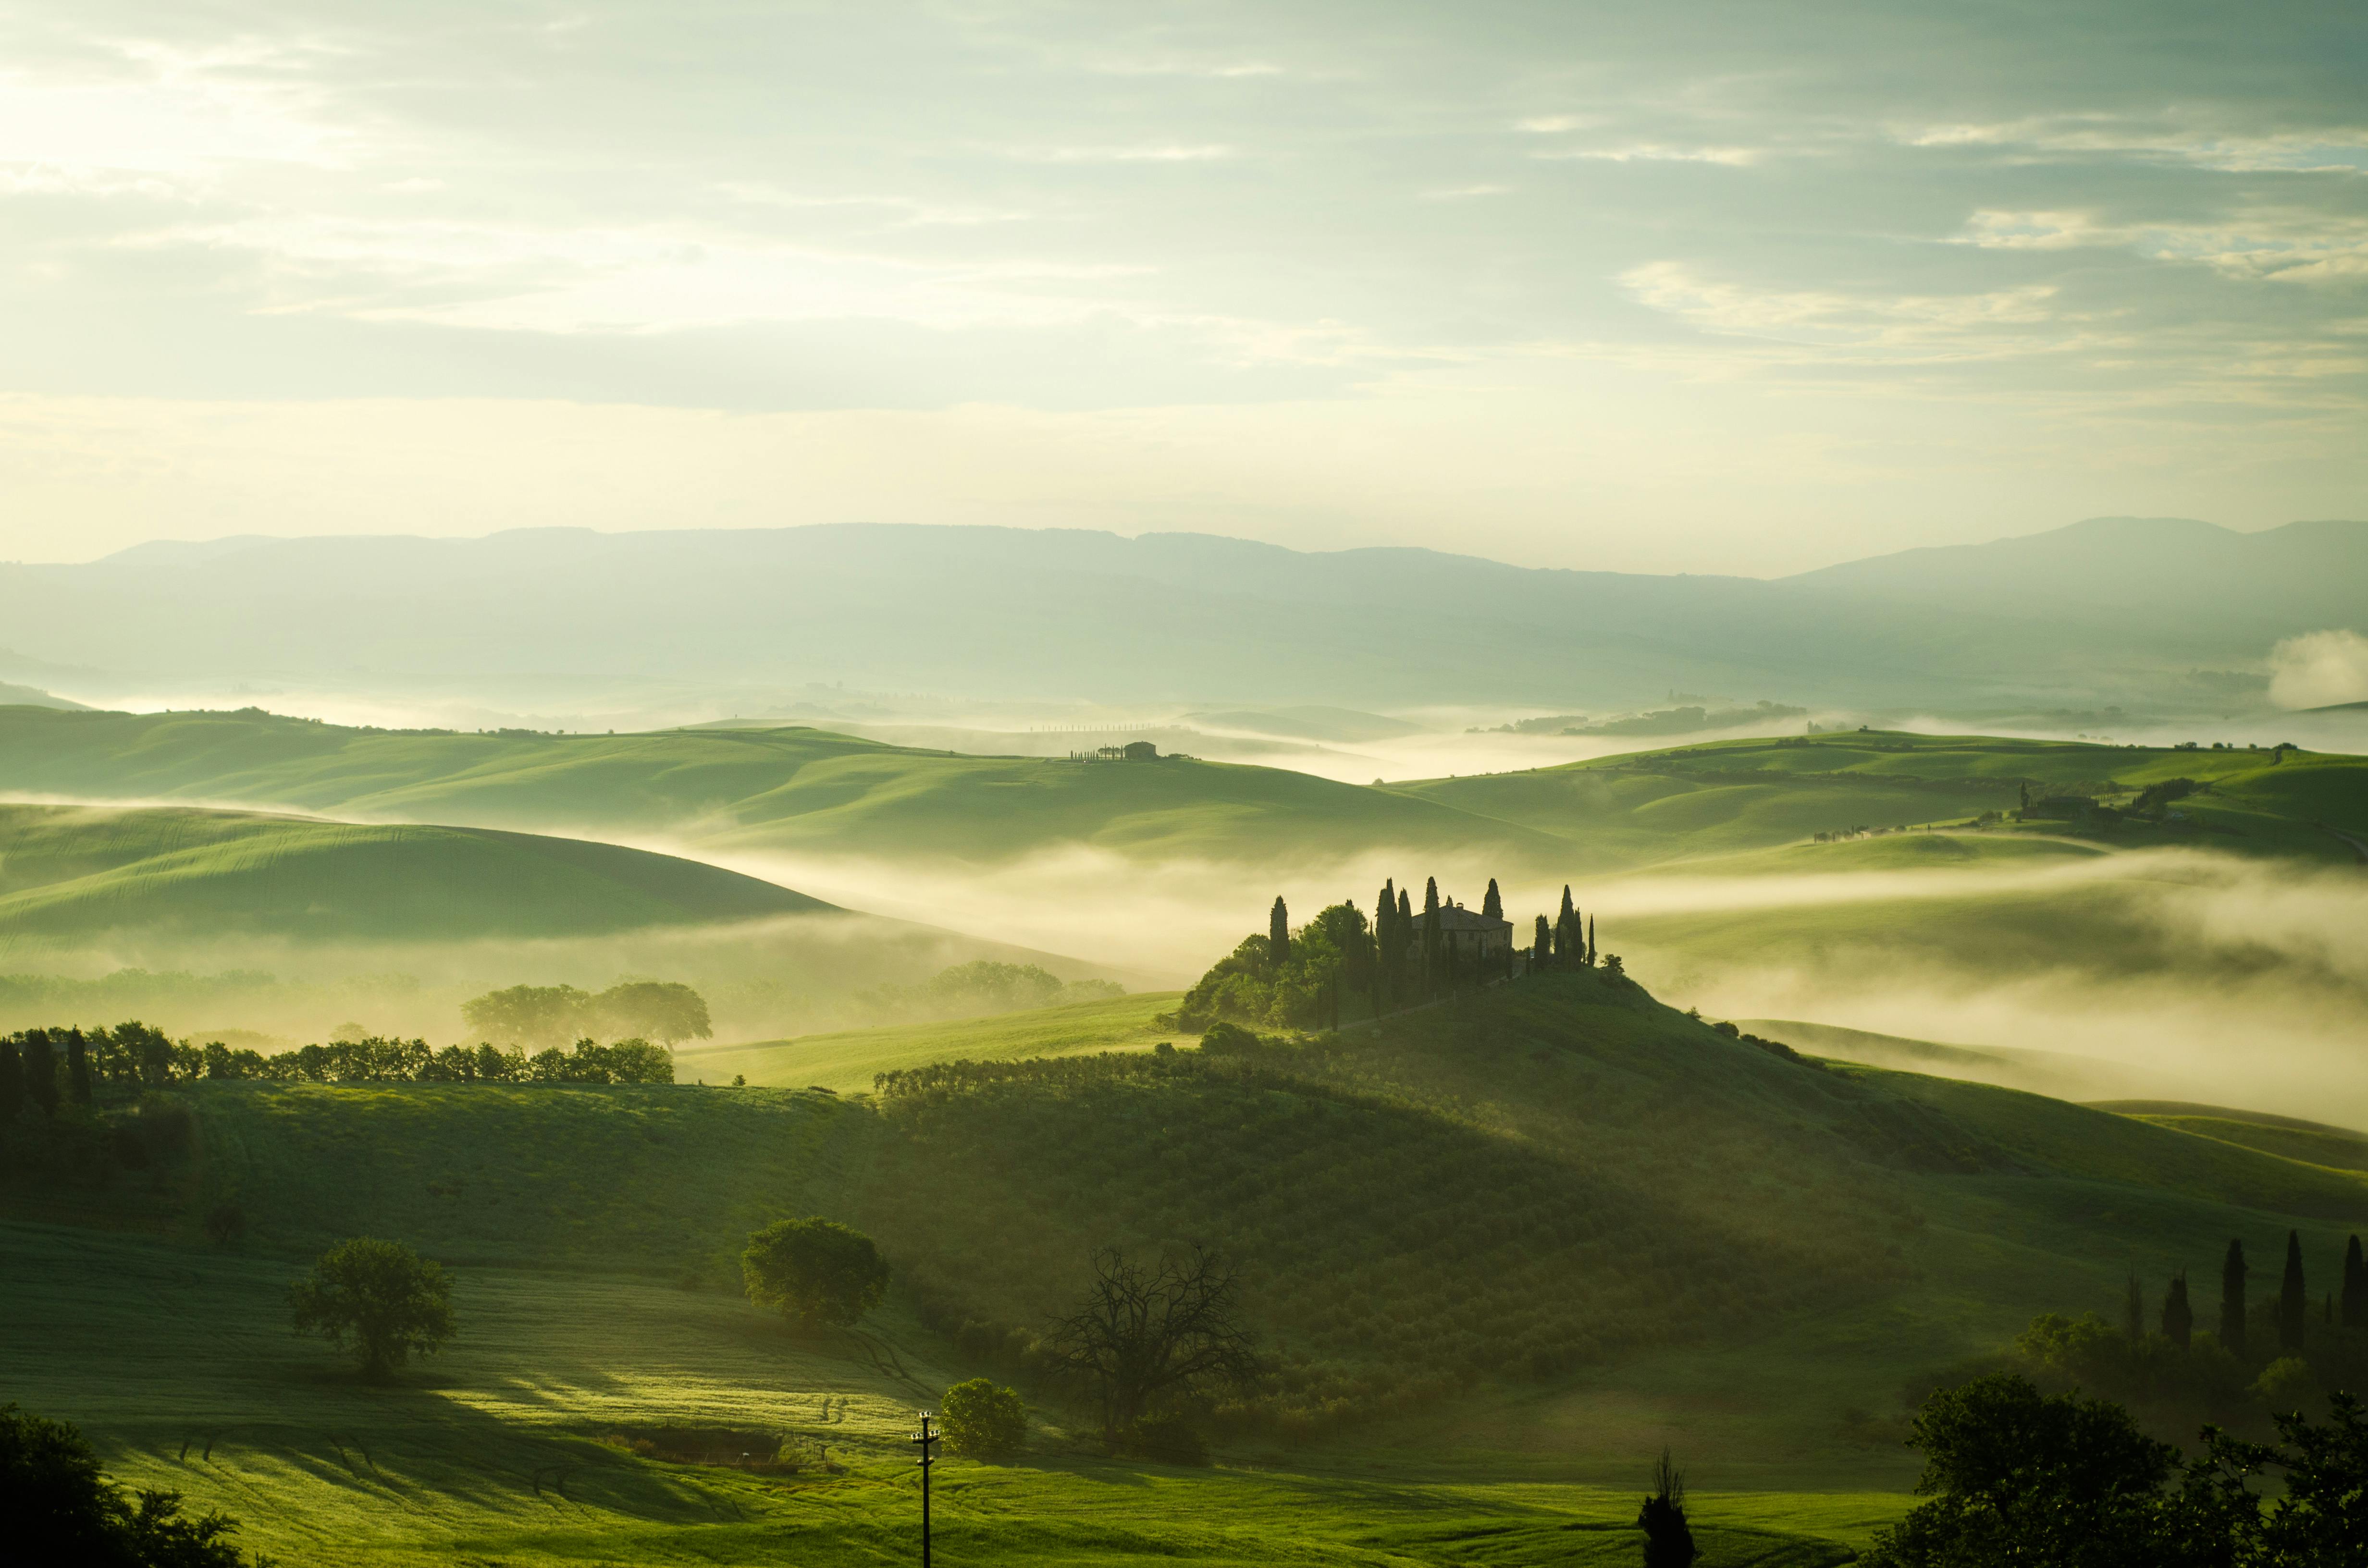 Wallpaper  2048x1366 px Italy landscape mist mountain nature  sunrise Tuscany valley 2048x1366  CoolWallpapers  1039713  HD  Wallpapers  WallHere